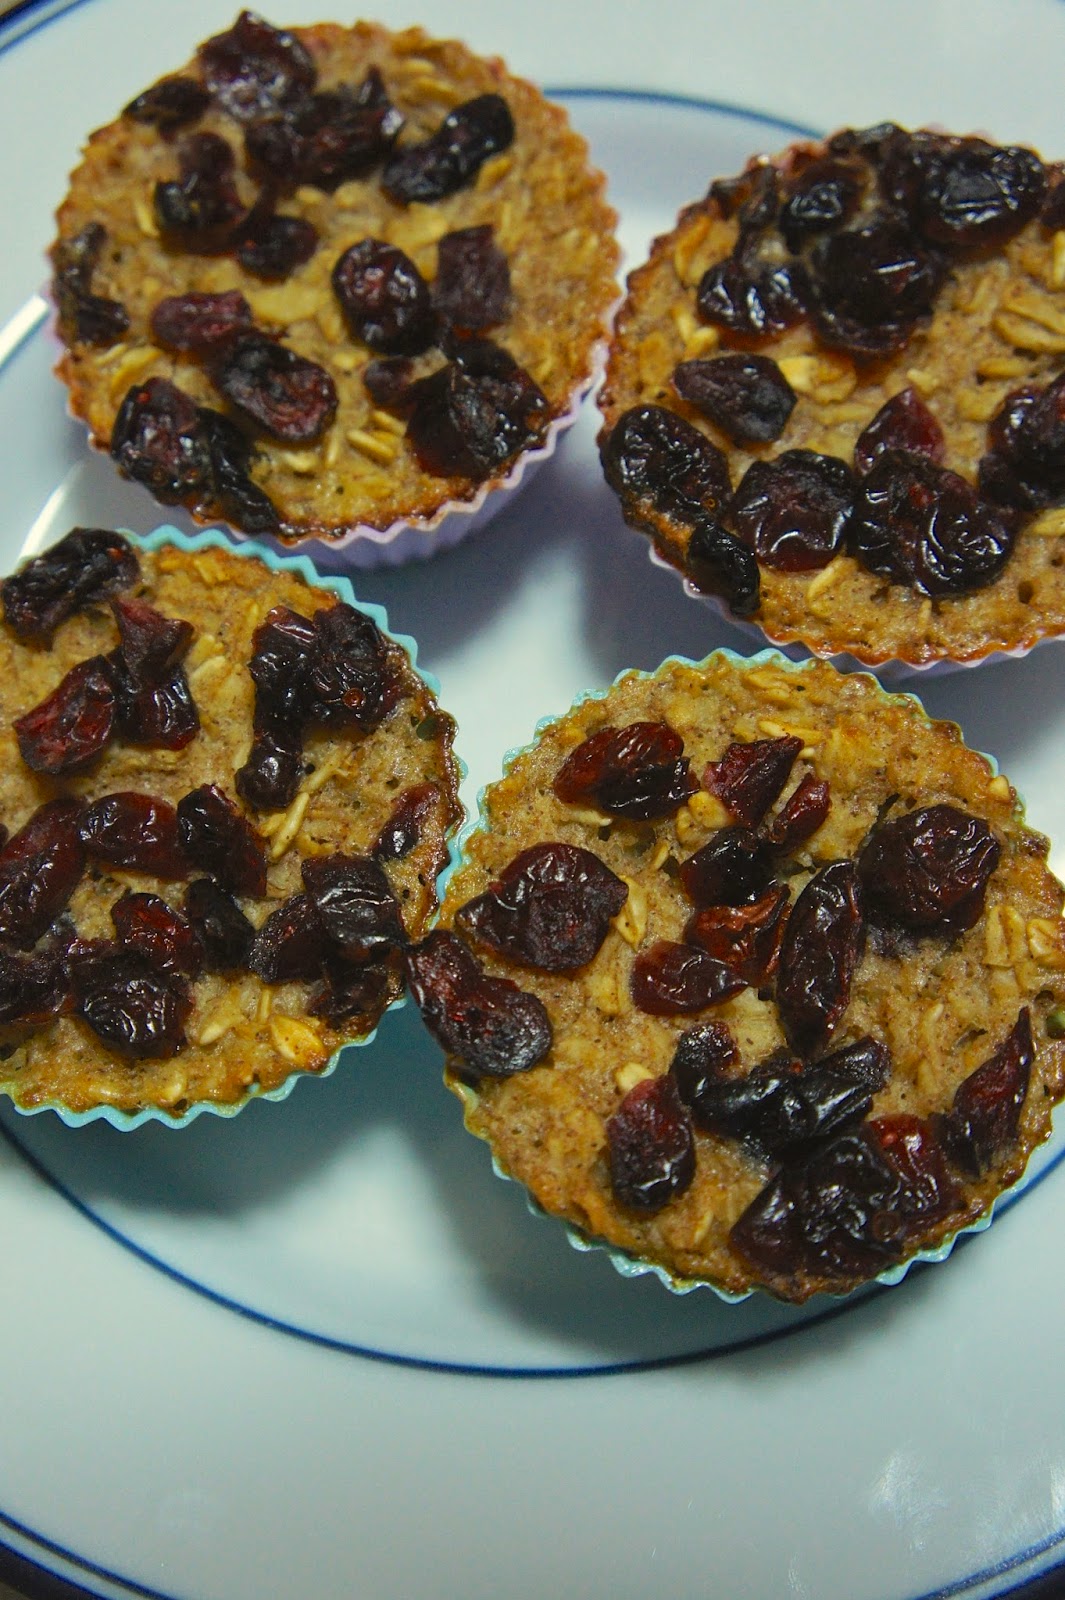 Savory Sweet and Satisfying: Baked Oatmeal Muffins